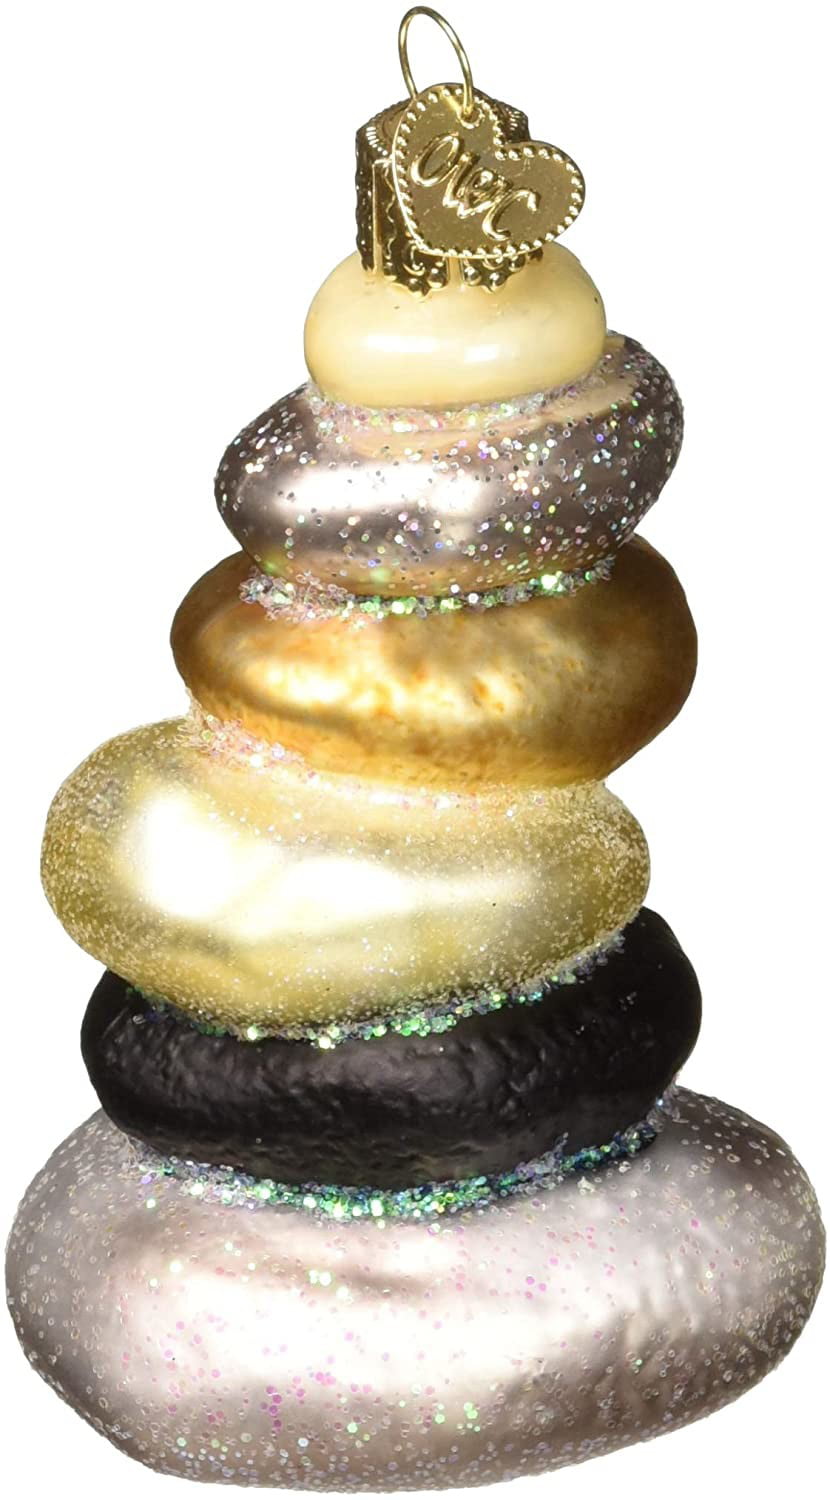 YOGA STONES MULTI-COLORED STACK OLD WORLD CHRISTMAS GLASS ORNAMENT NWT 36209 